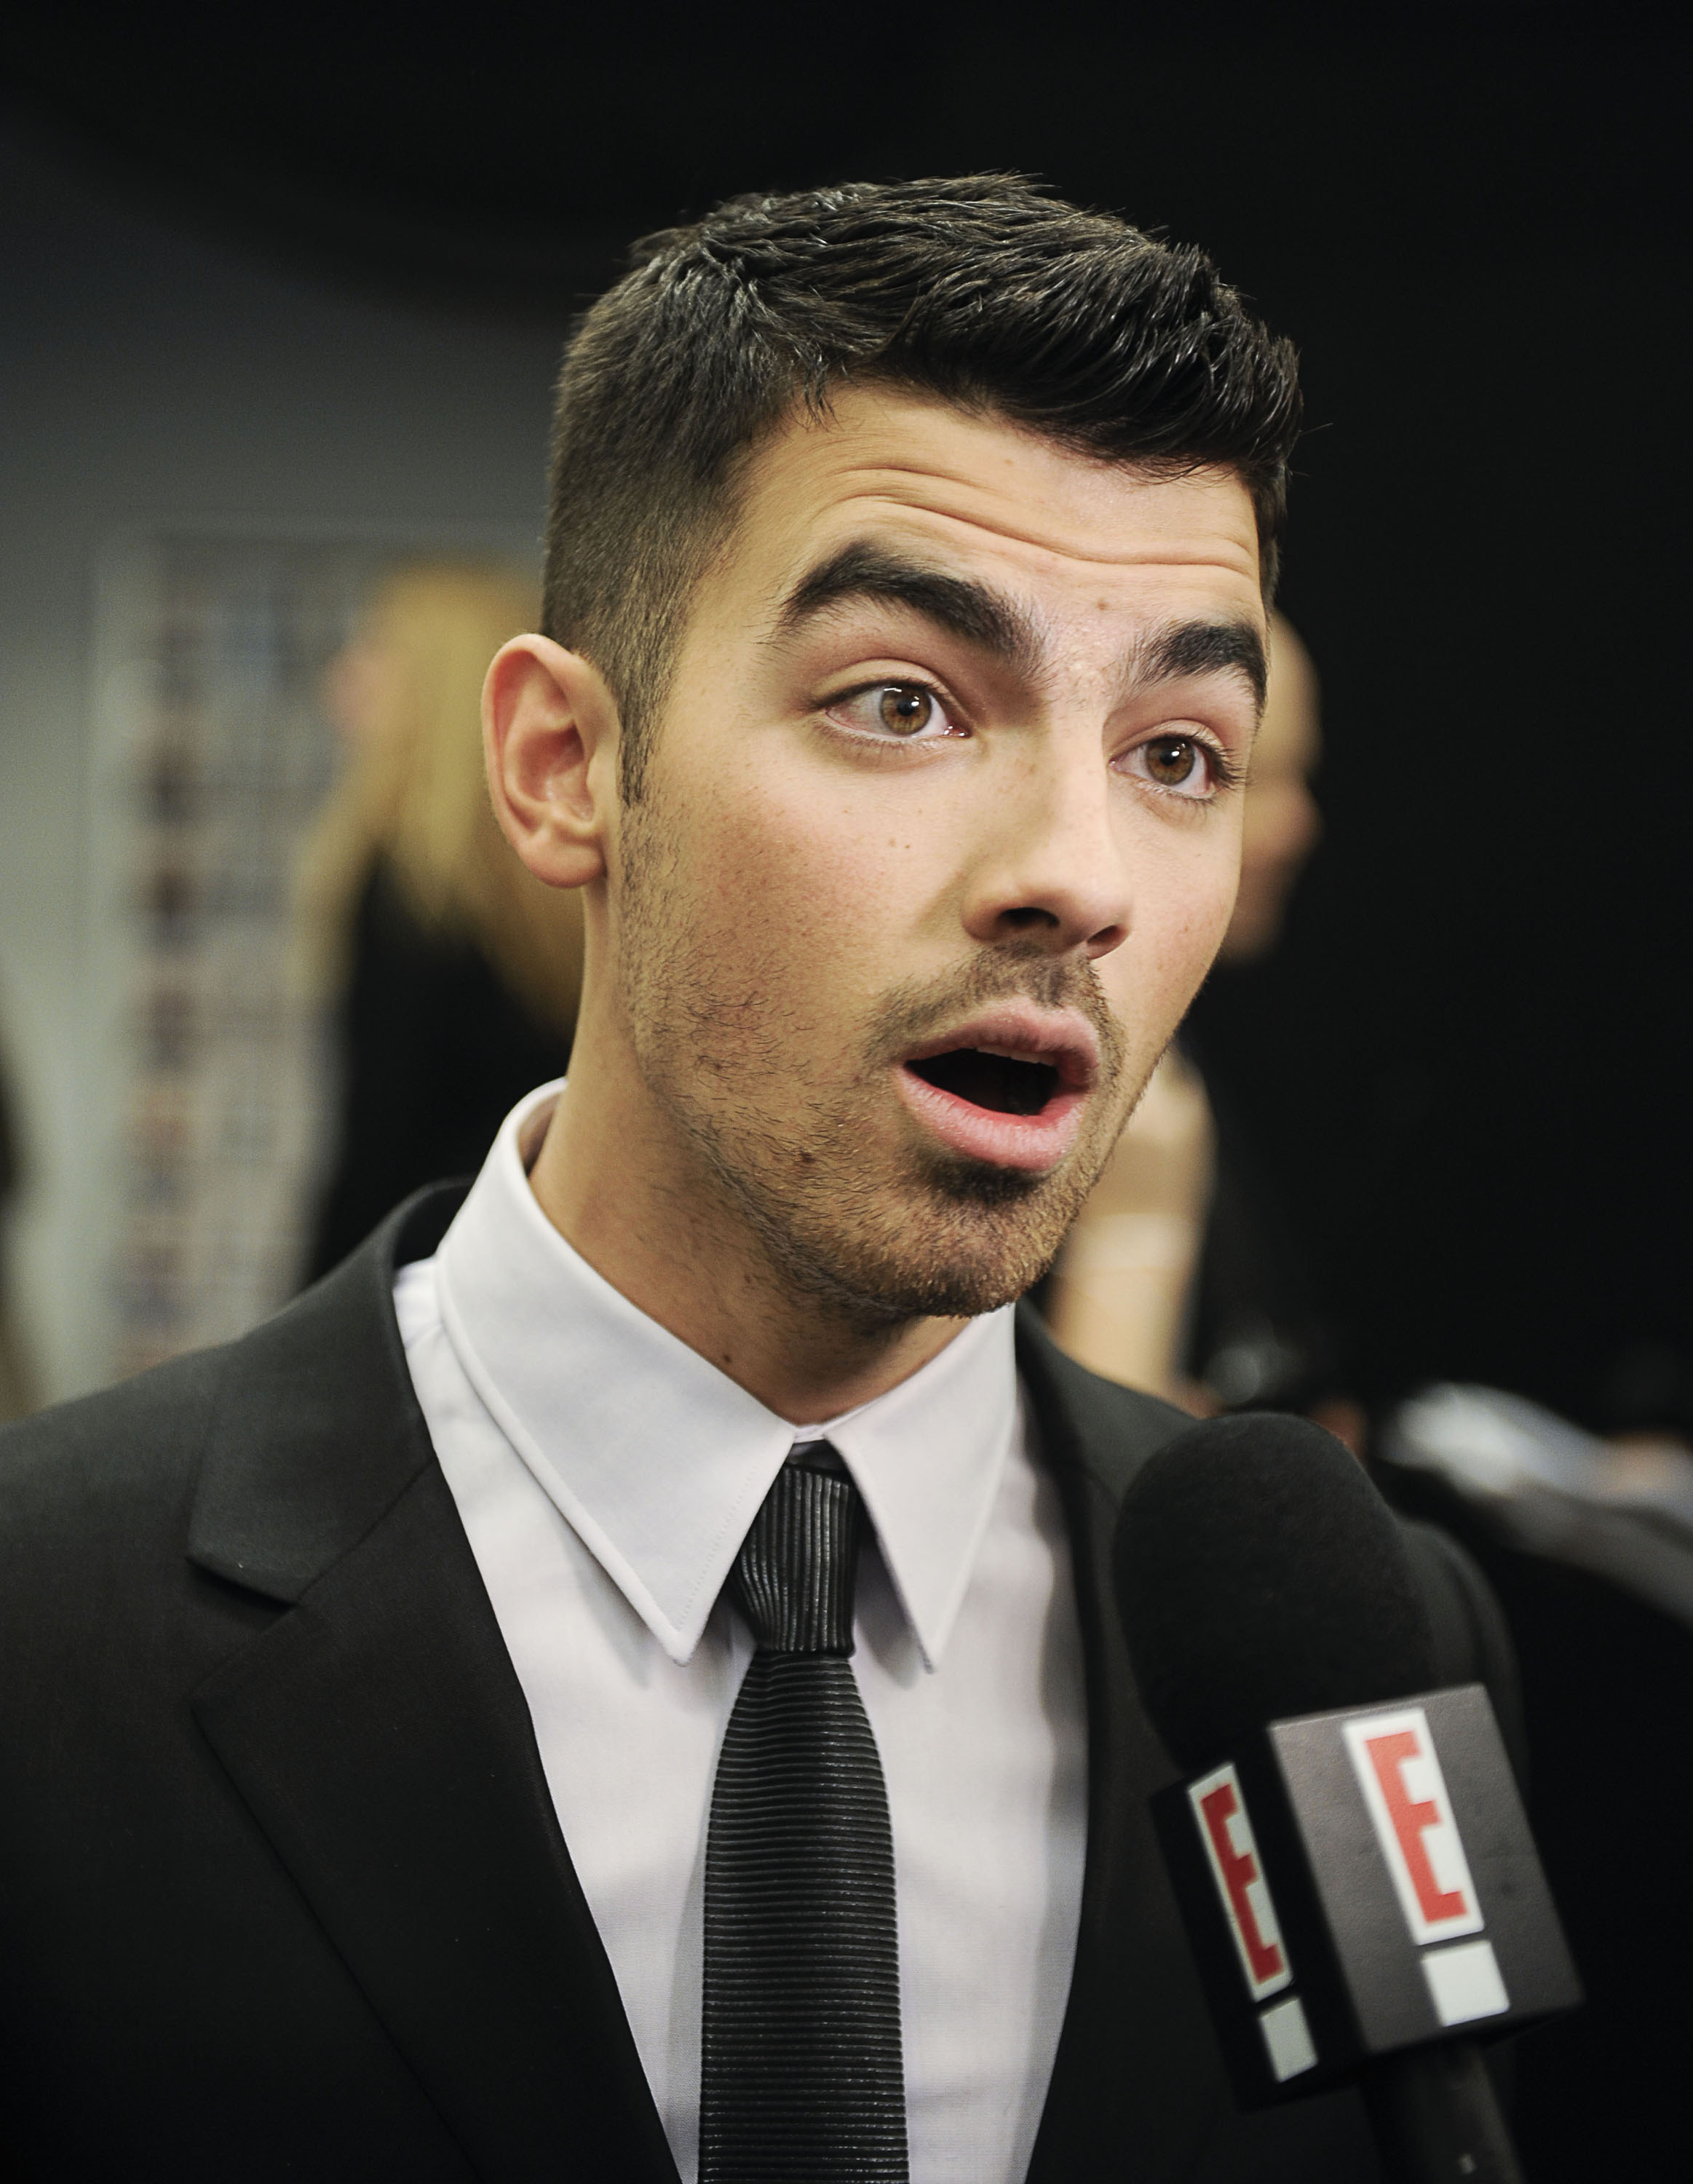 Joe in a suit and tie being interviewed